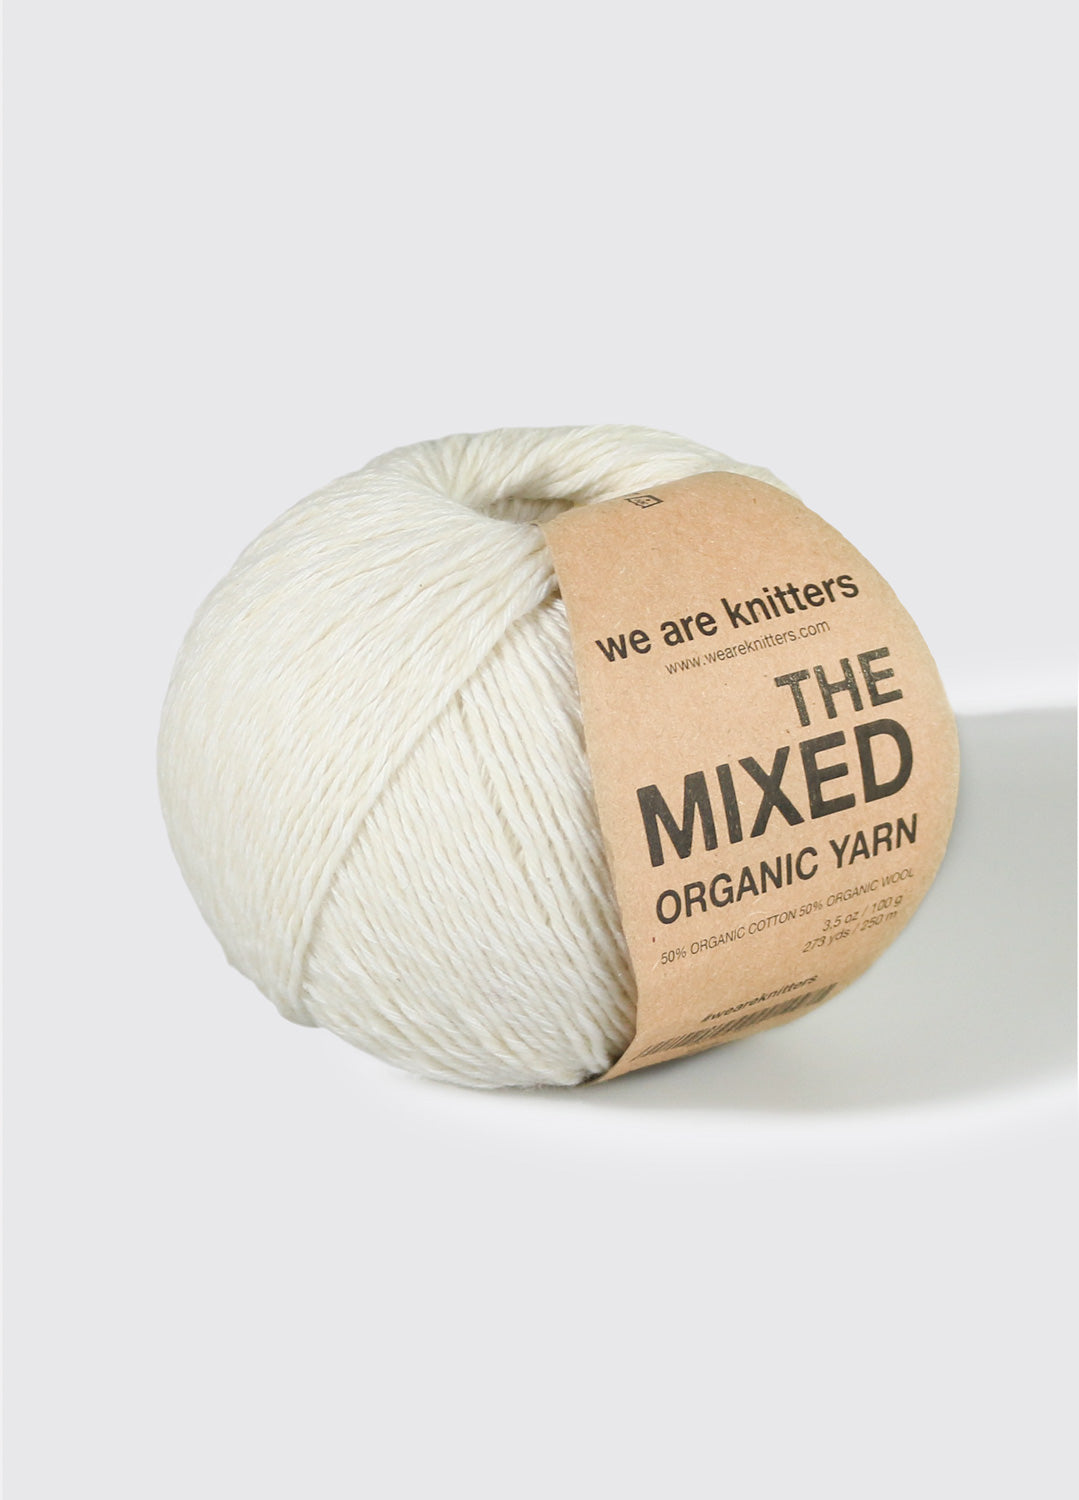 100% Cotton Yarn in Canada, Free Shipping at